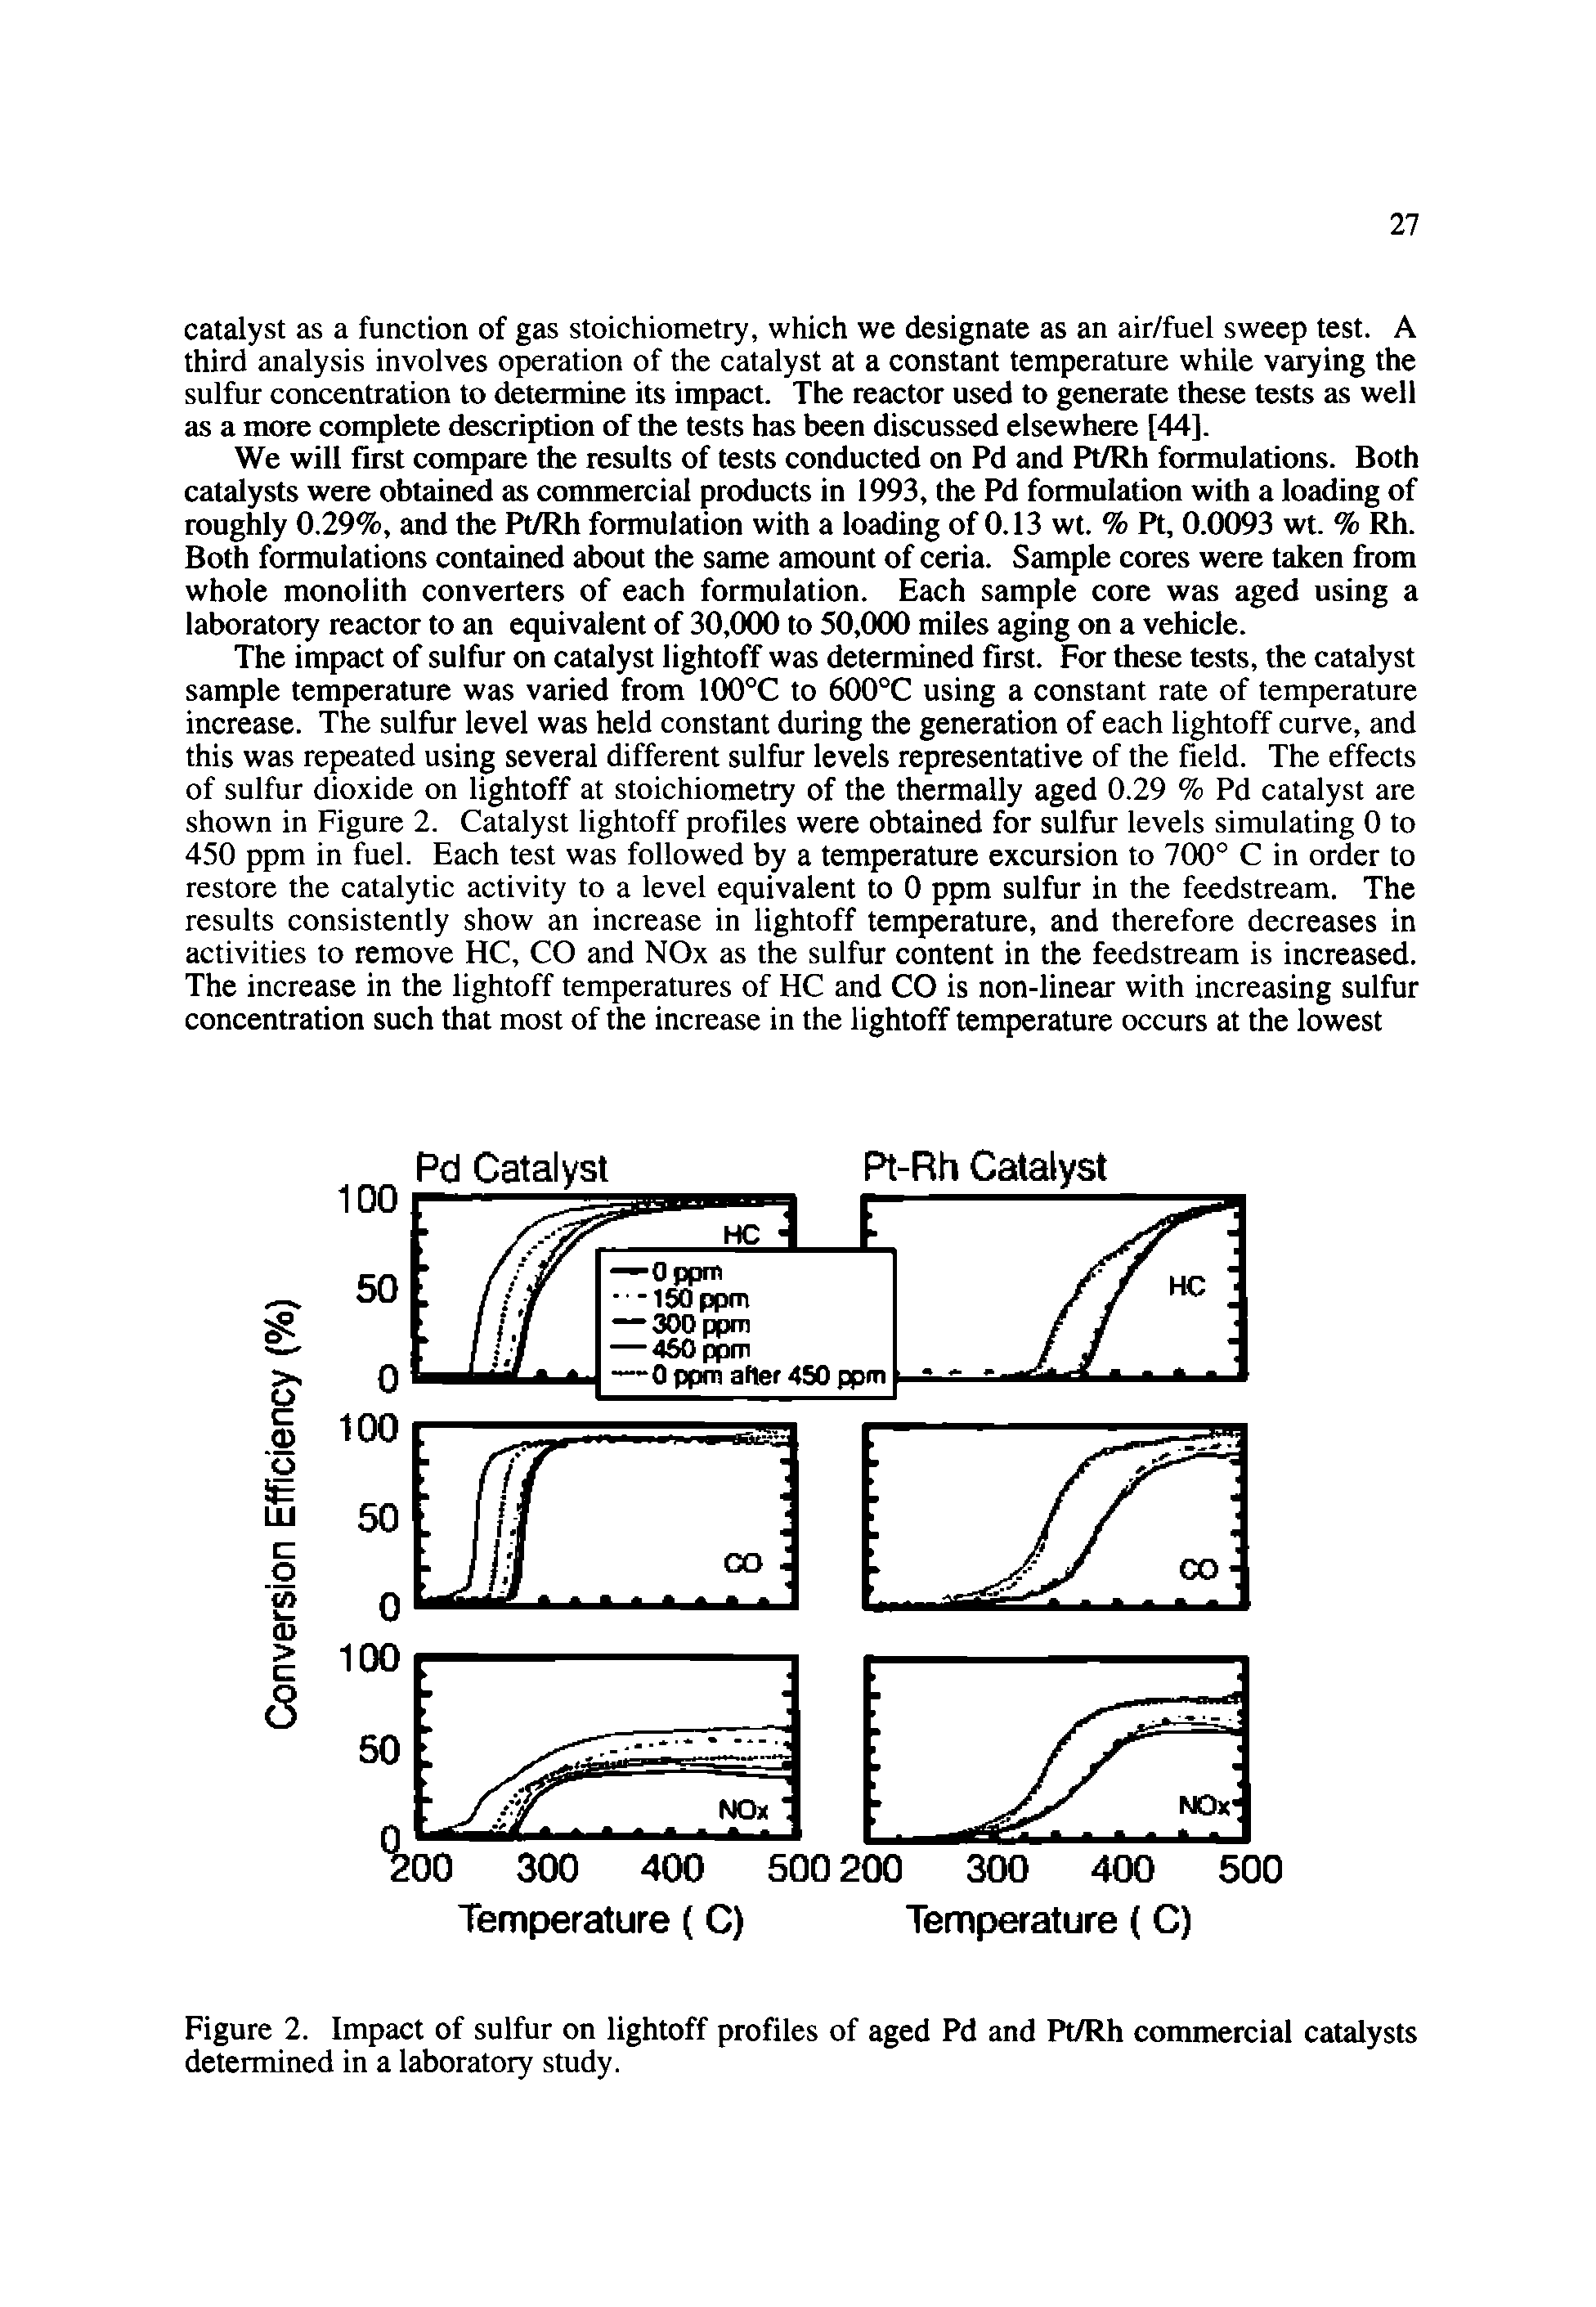 Figure 2. Impact of sulfur on lightoff profiles of aged Pd and Pt/Rh commercial catalysts determined in a laboratory study.